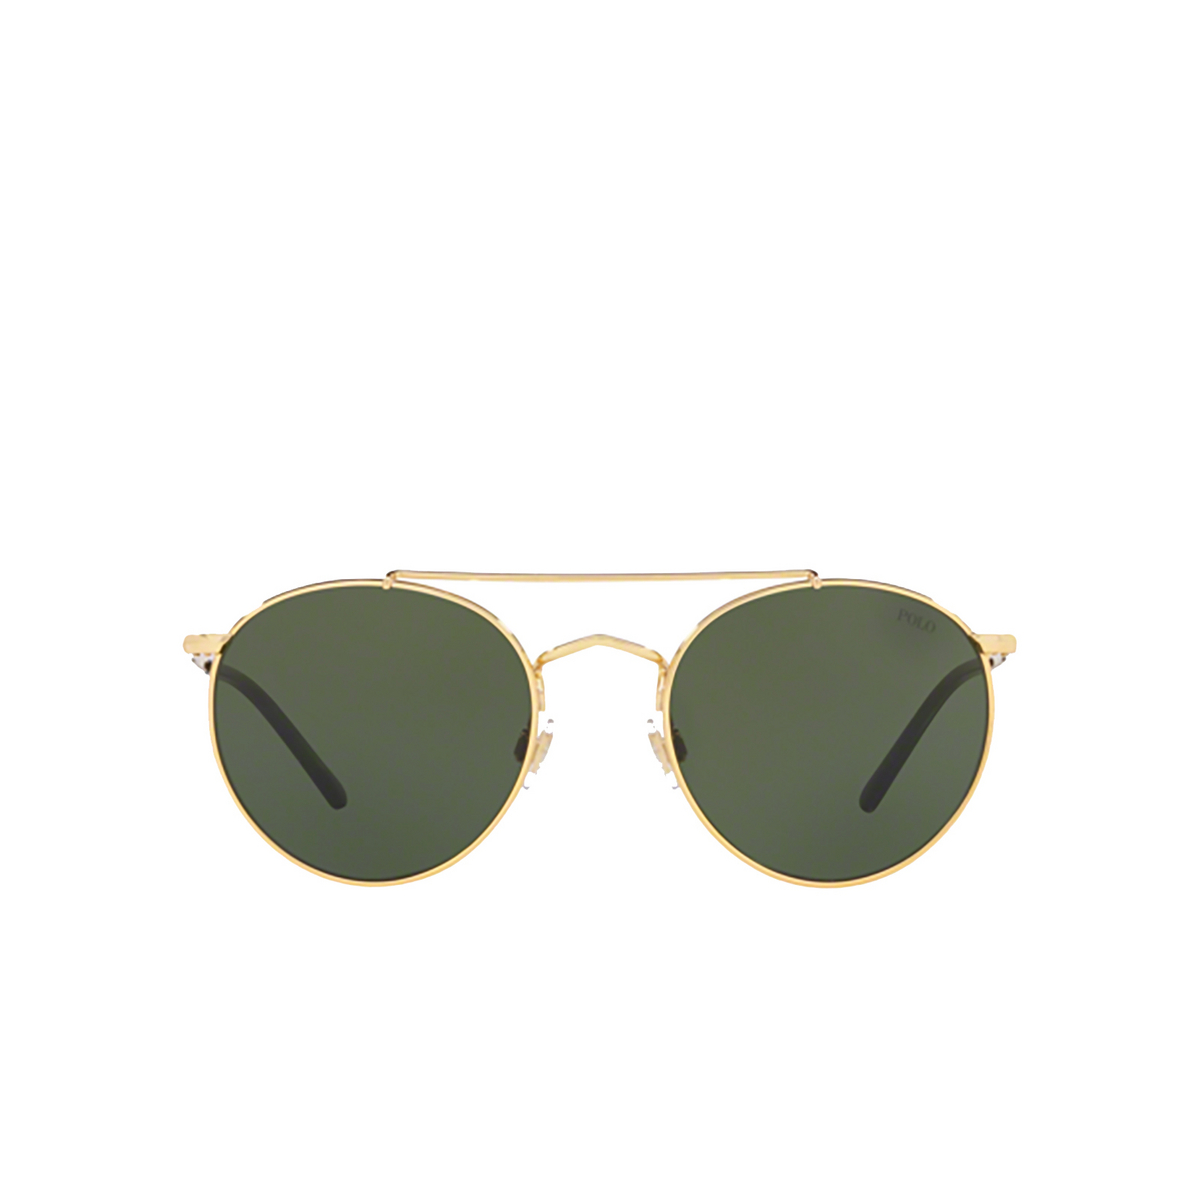 Polo Ralph Lauren® Round Sunglasses: PH3114 color Shiny Gold 900471 - front view.